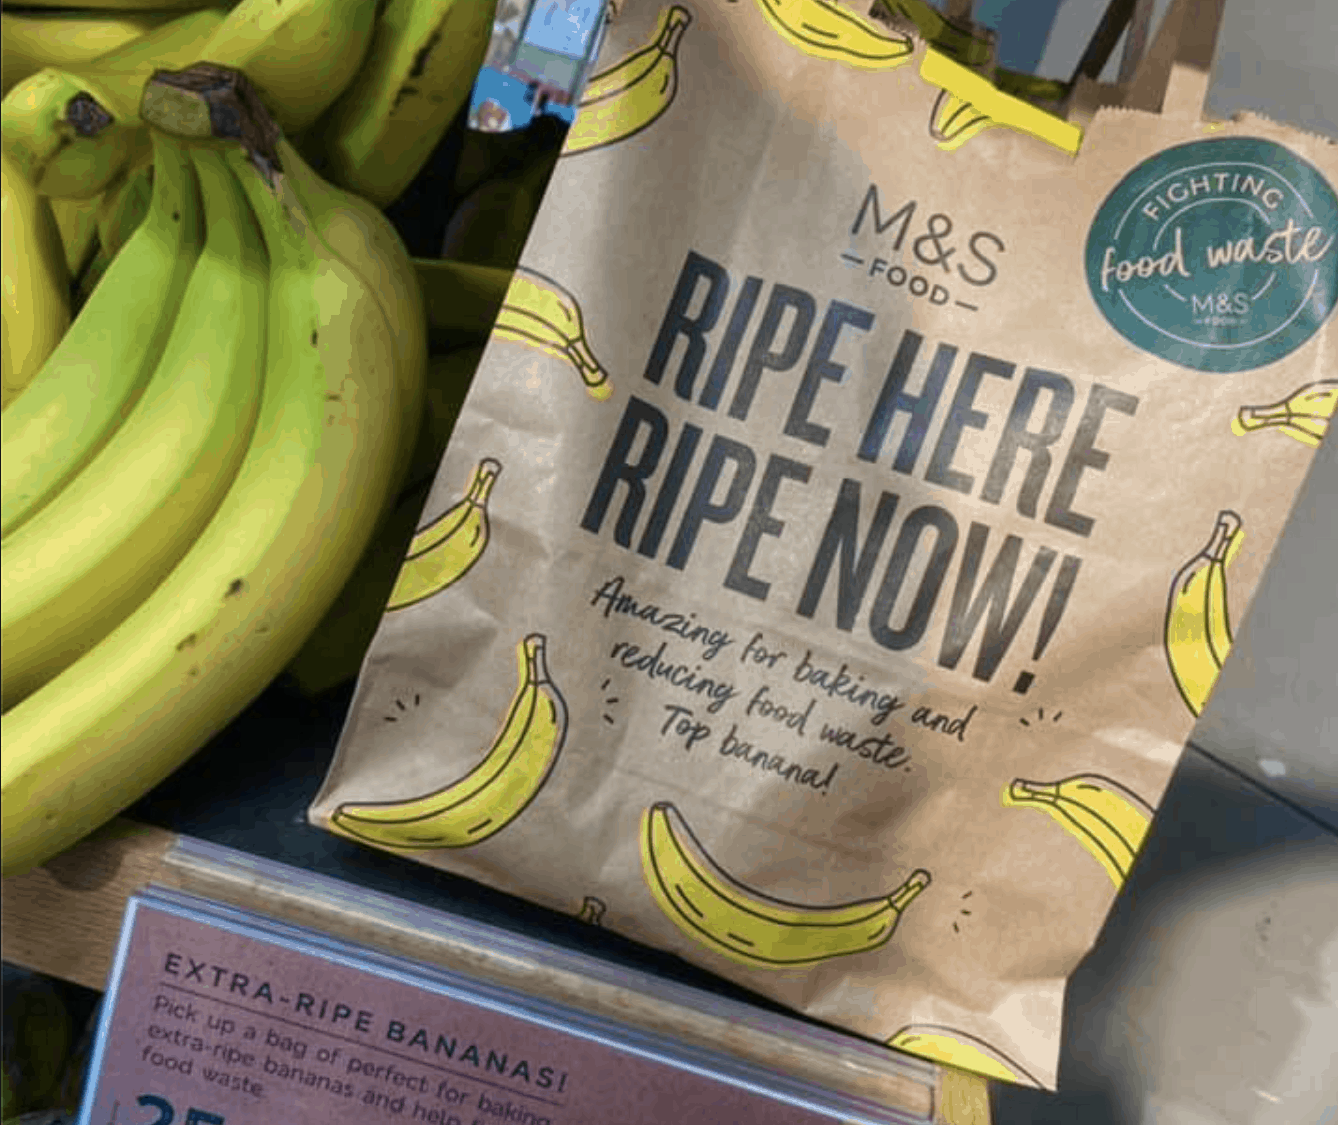 M&S introduces 25p banana bags to reduce food waste